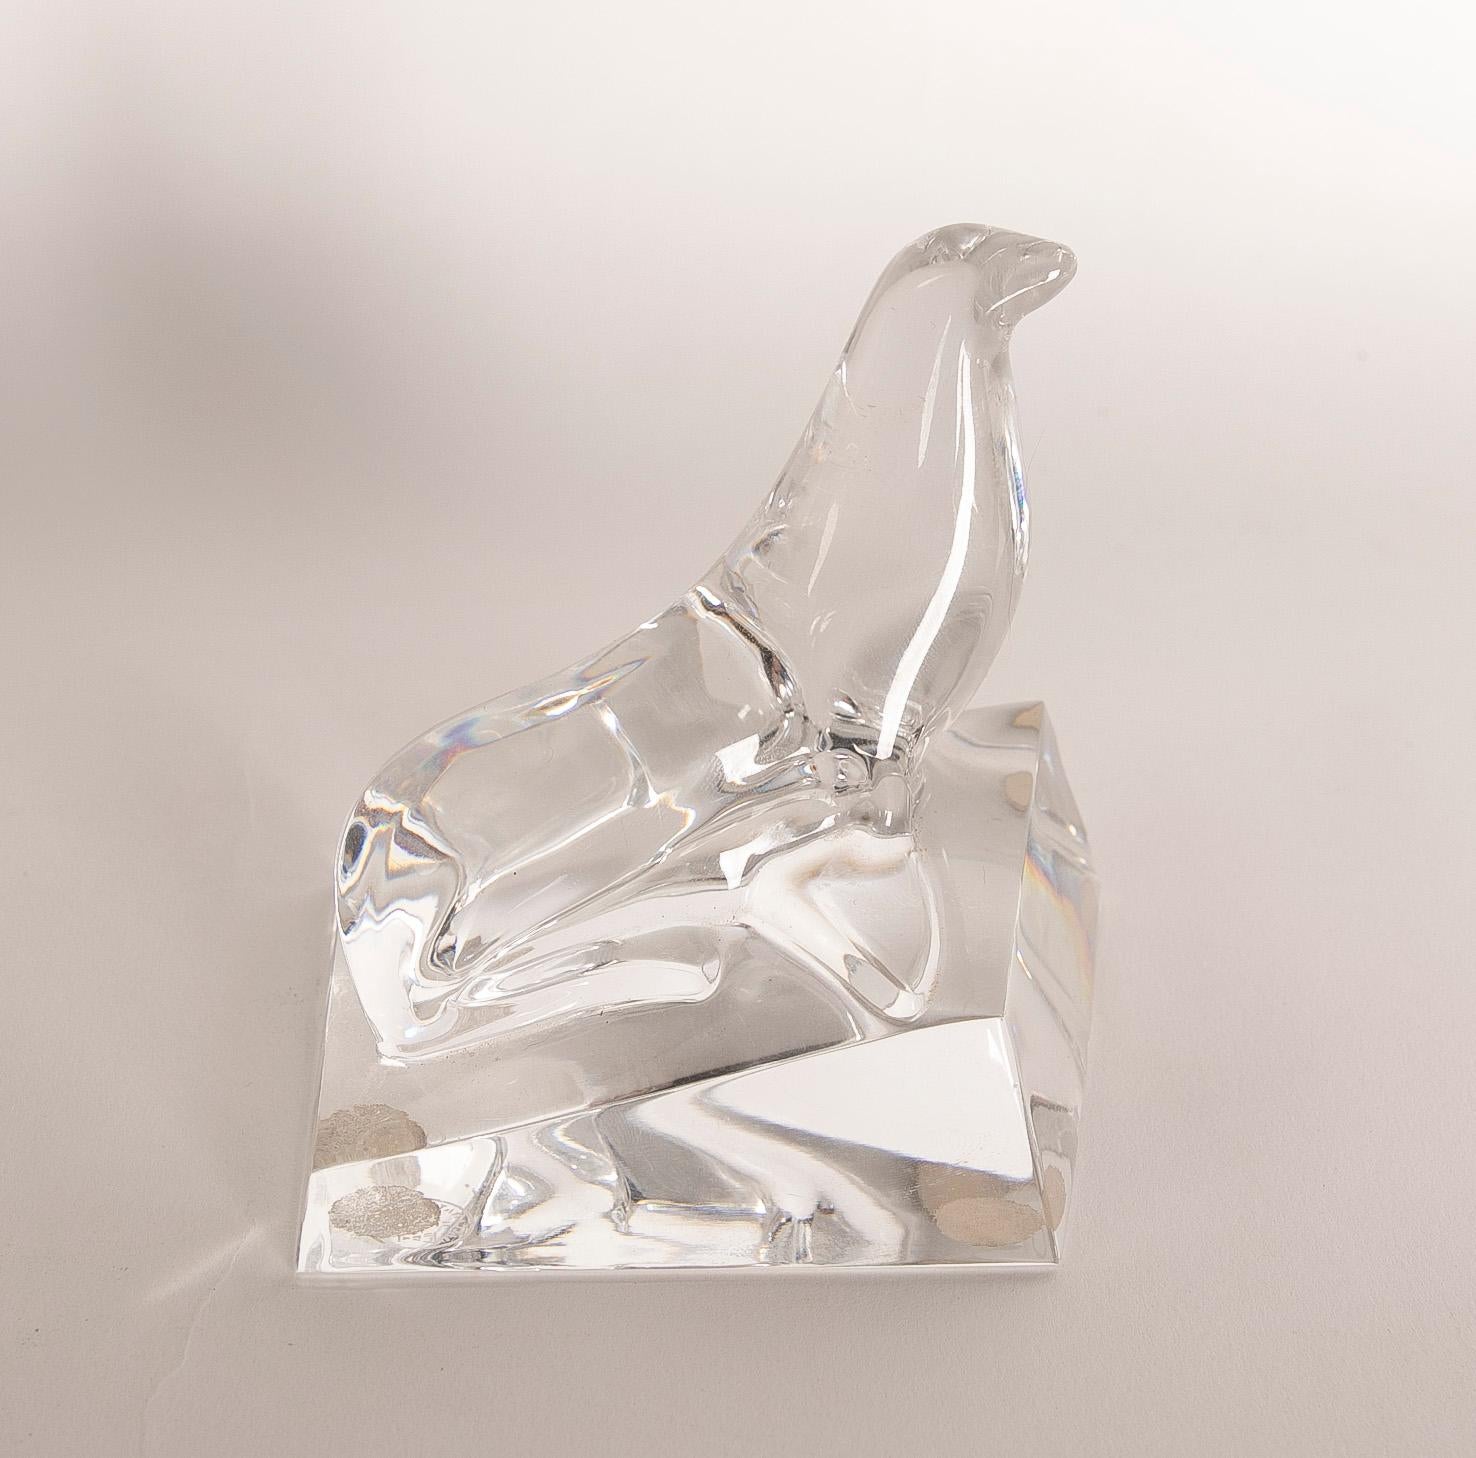 1970s Italian Solid Crystal Sculpture of a Seal on a Base.

